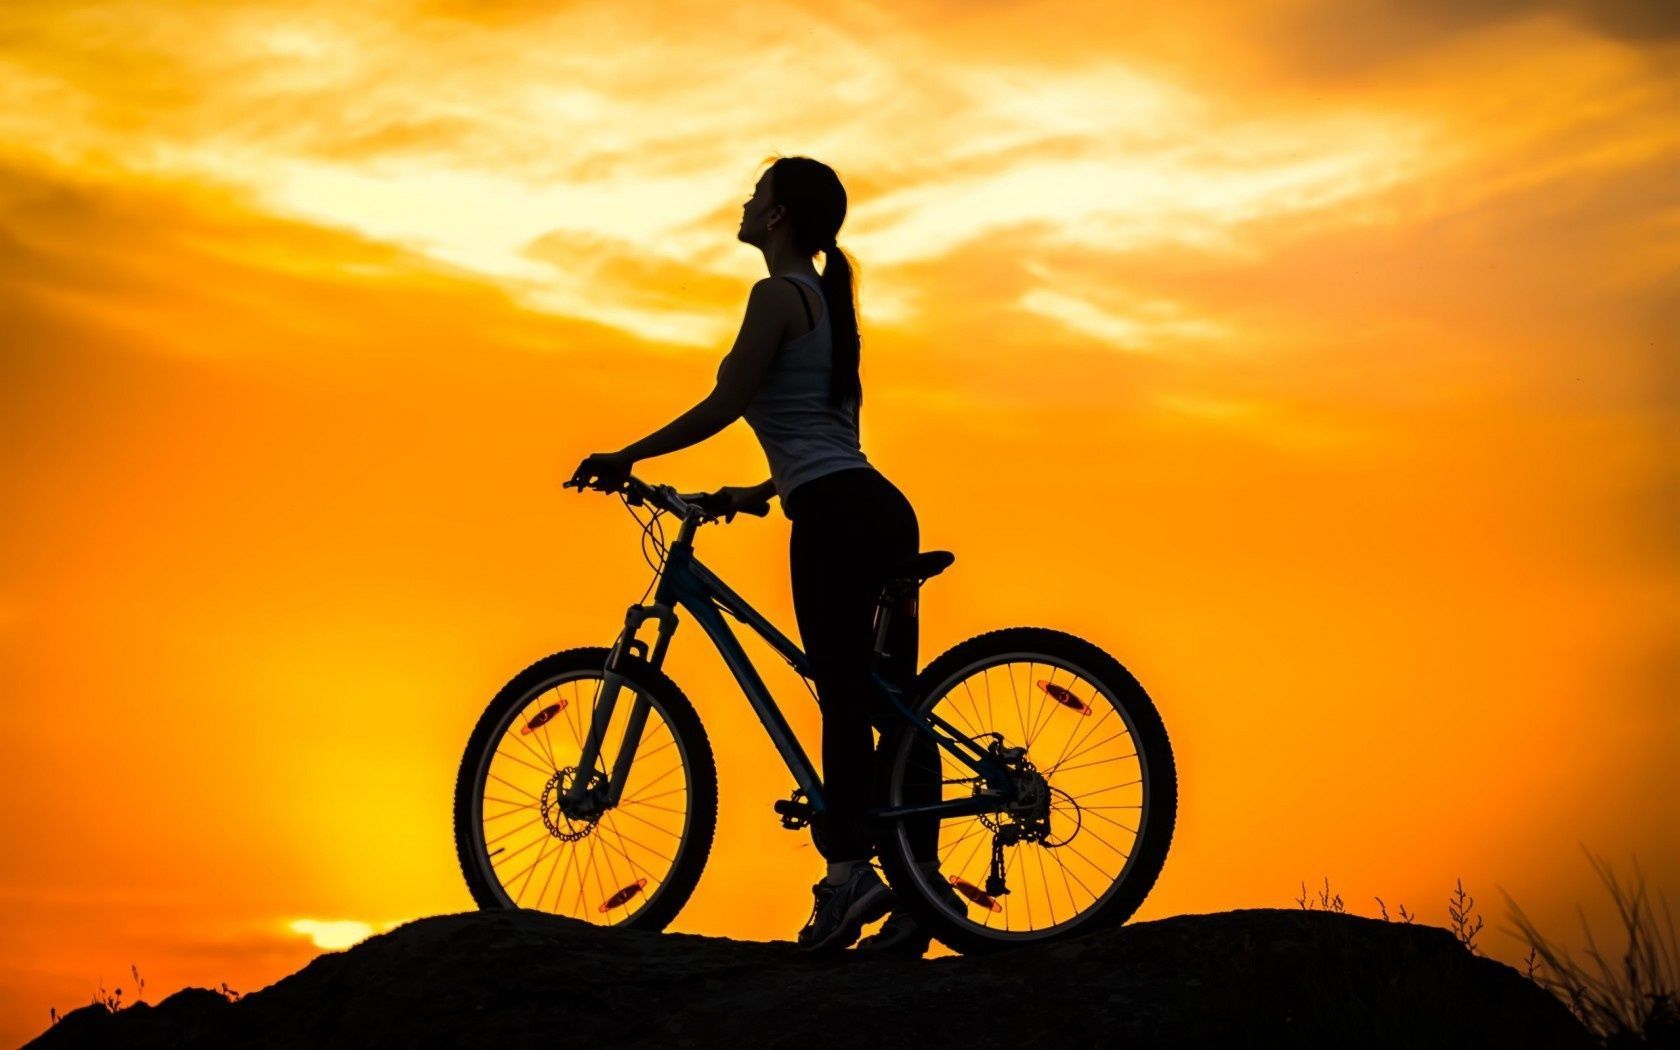 Cycling Desktop Wallpaper Cycling Images Cool Backgrounds